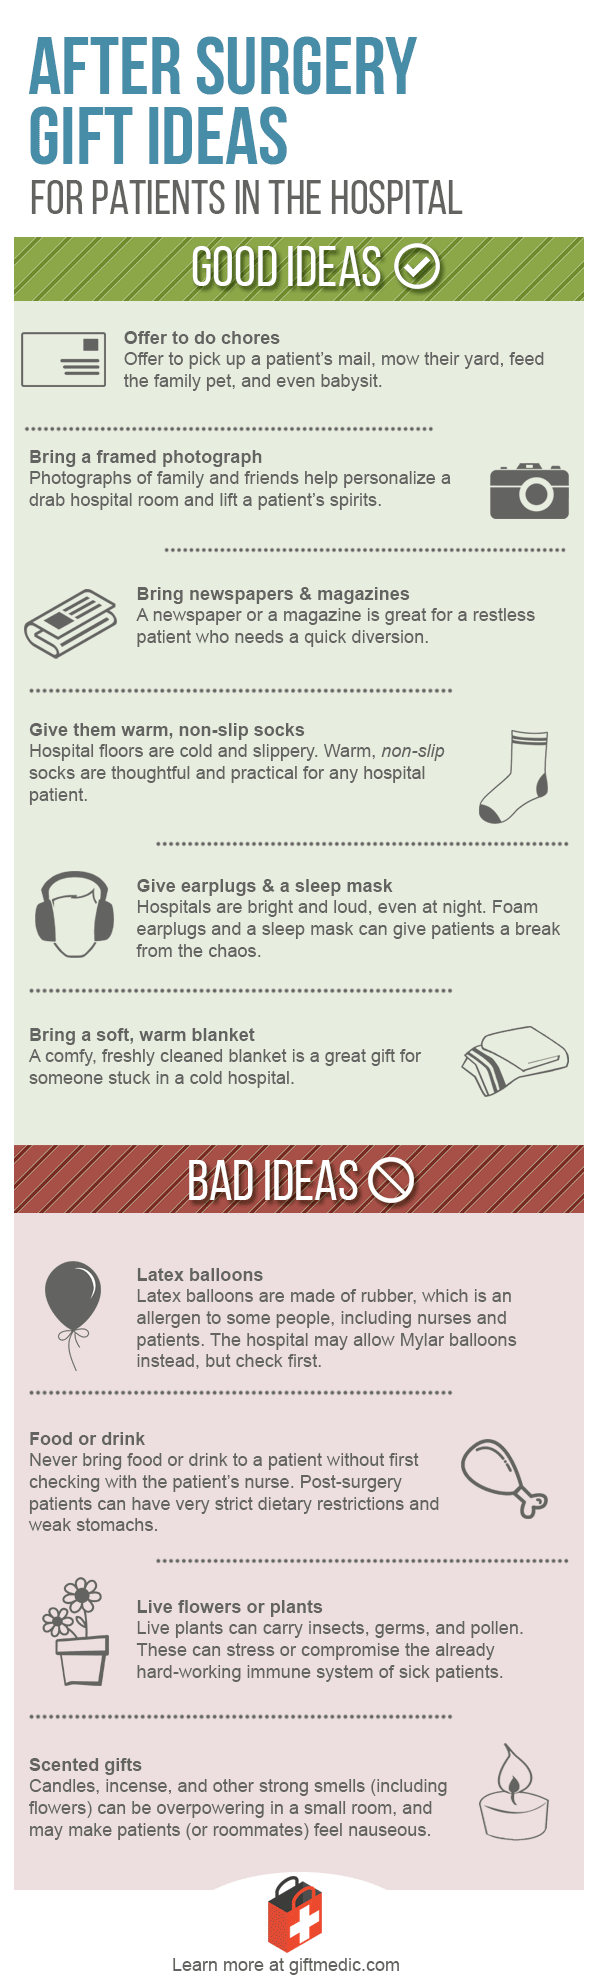 Infographic of after surgery gift ideas for patients in the hospital - From GiftMedic